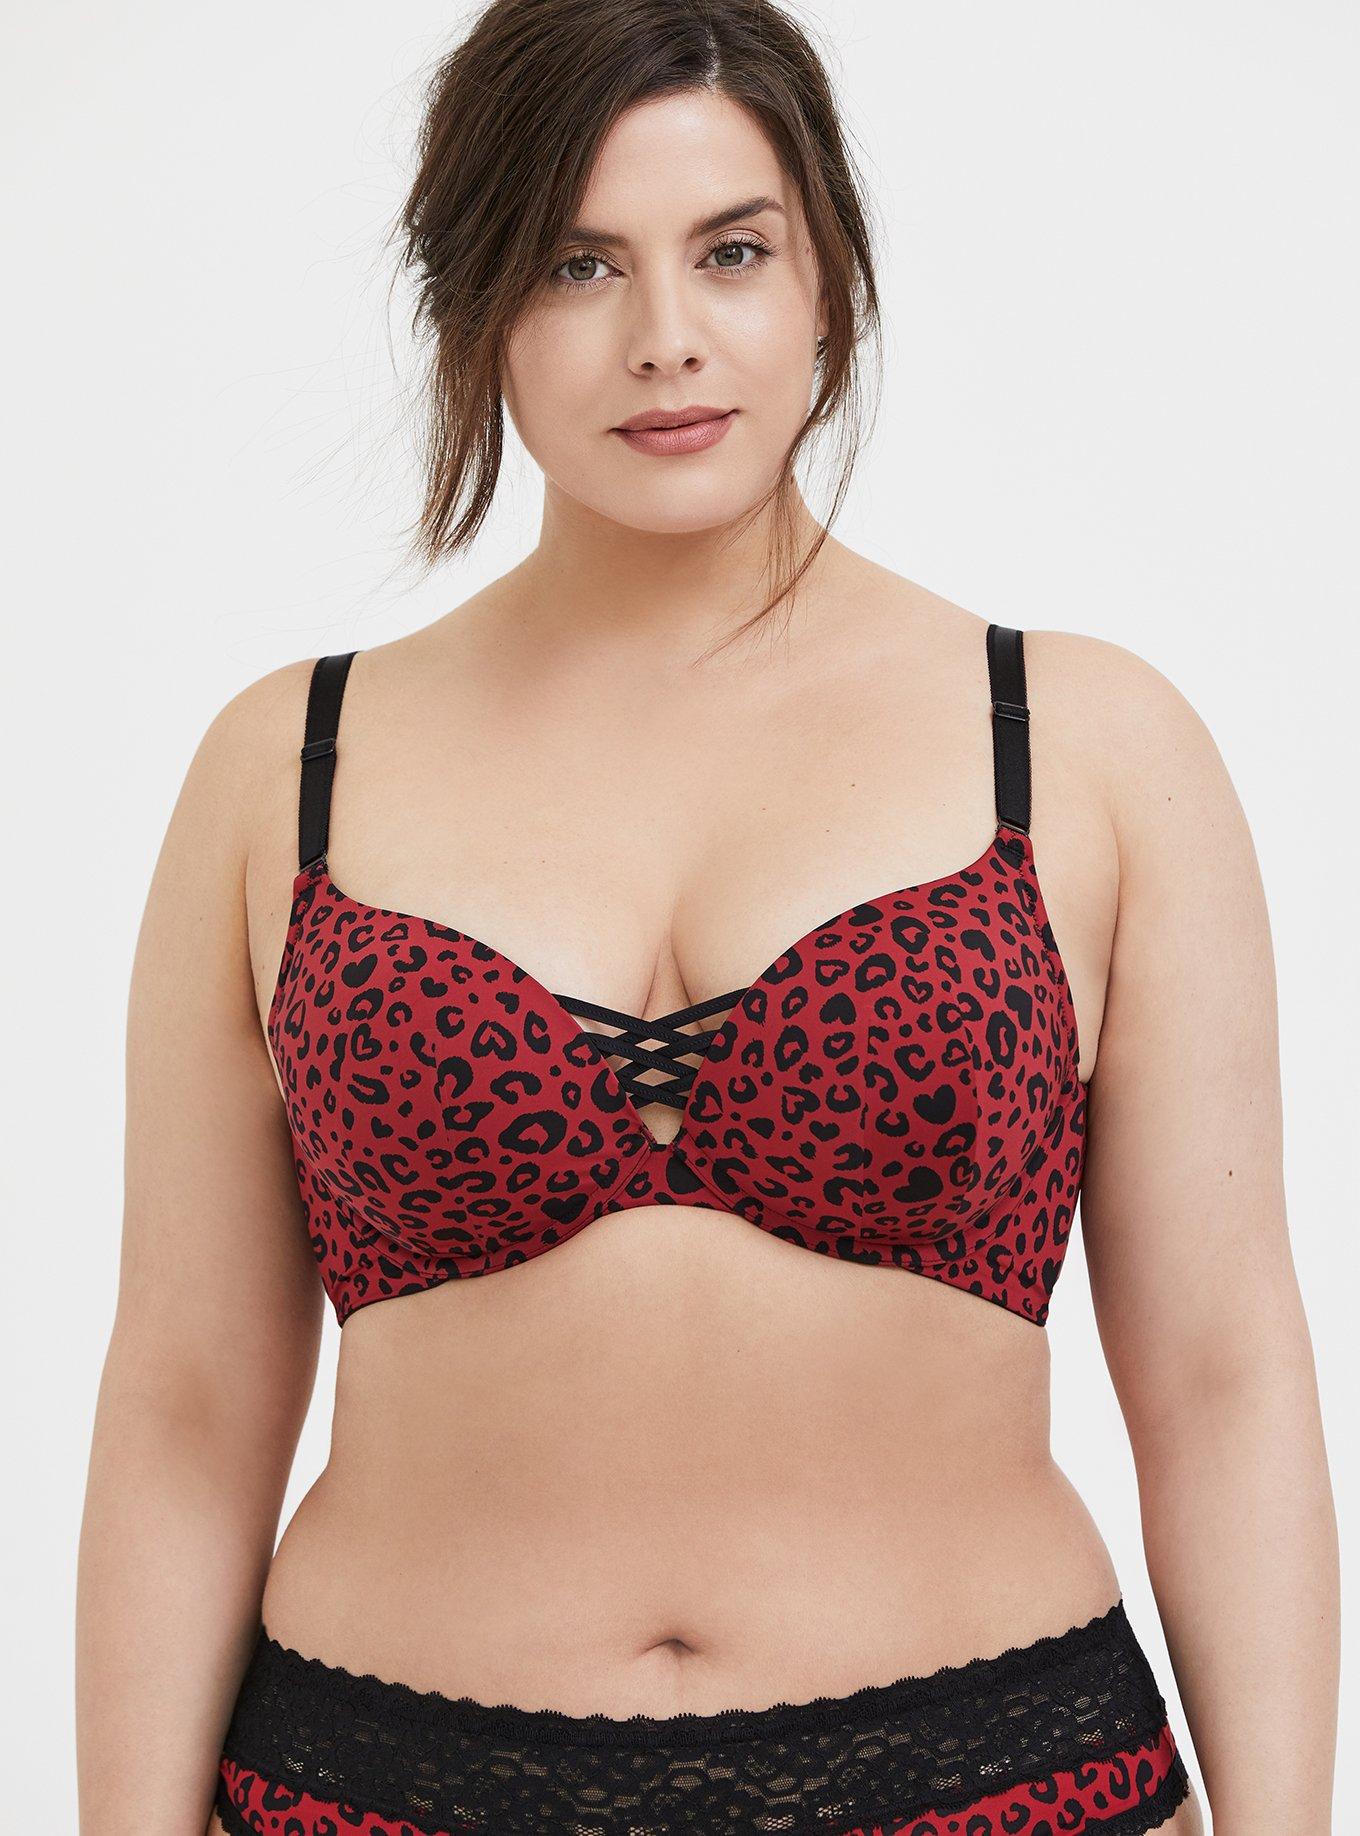 Intimates & Sleepwear, Black And Red Lace Bra Adjustable Red Strsps Size 36c  Push Up Padded